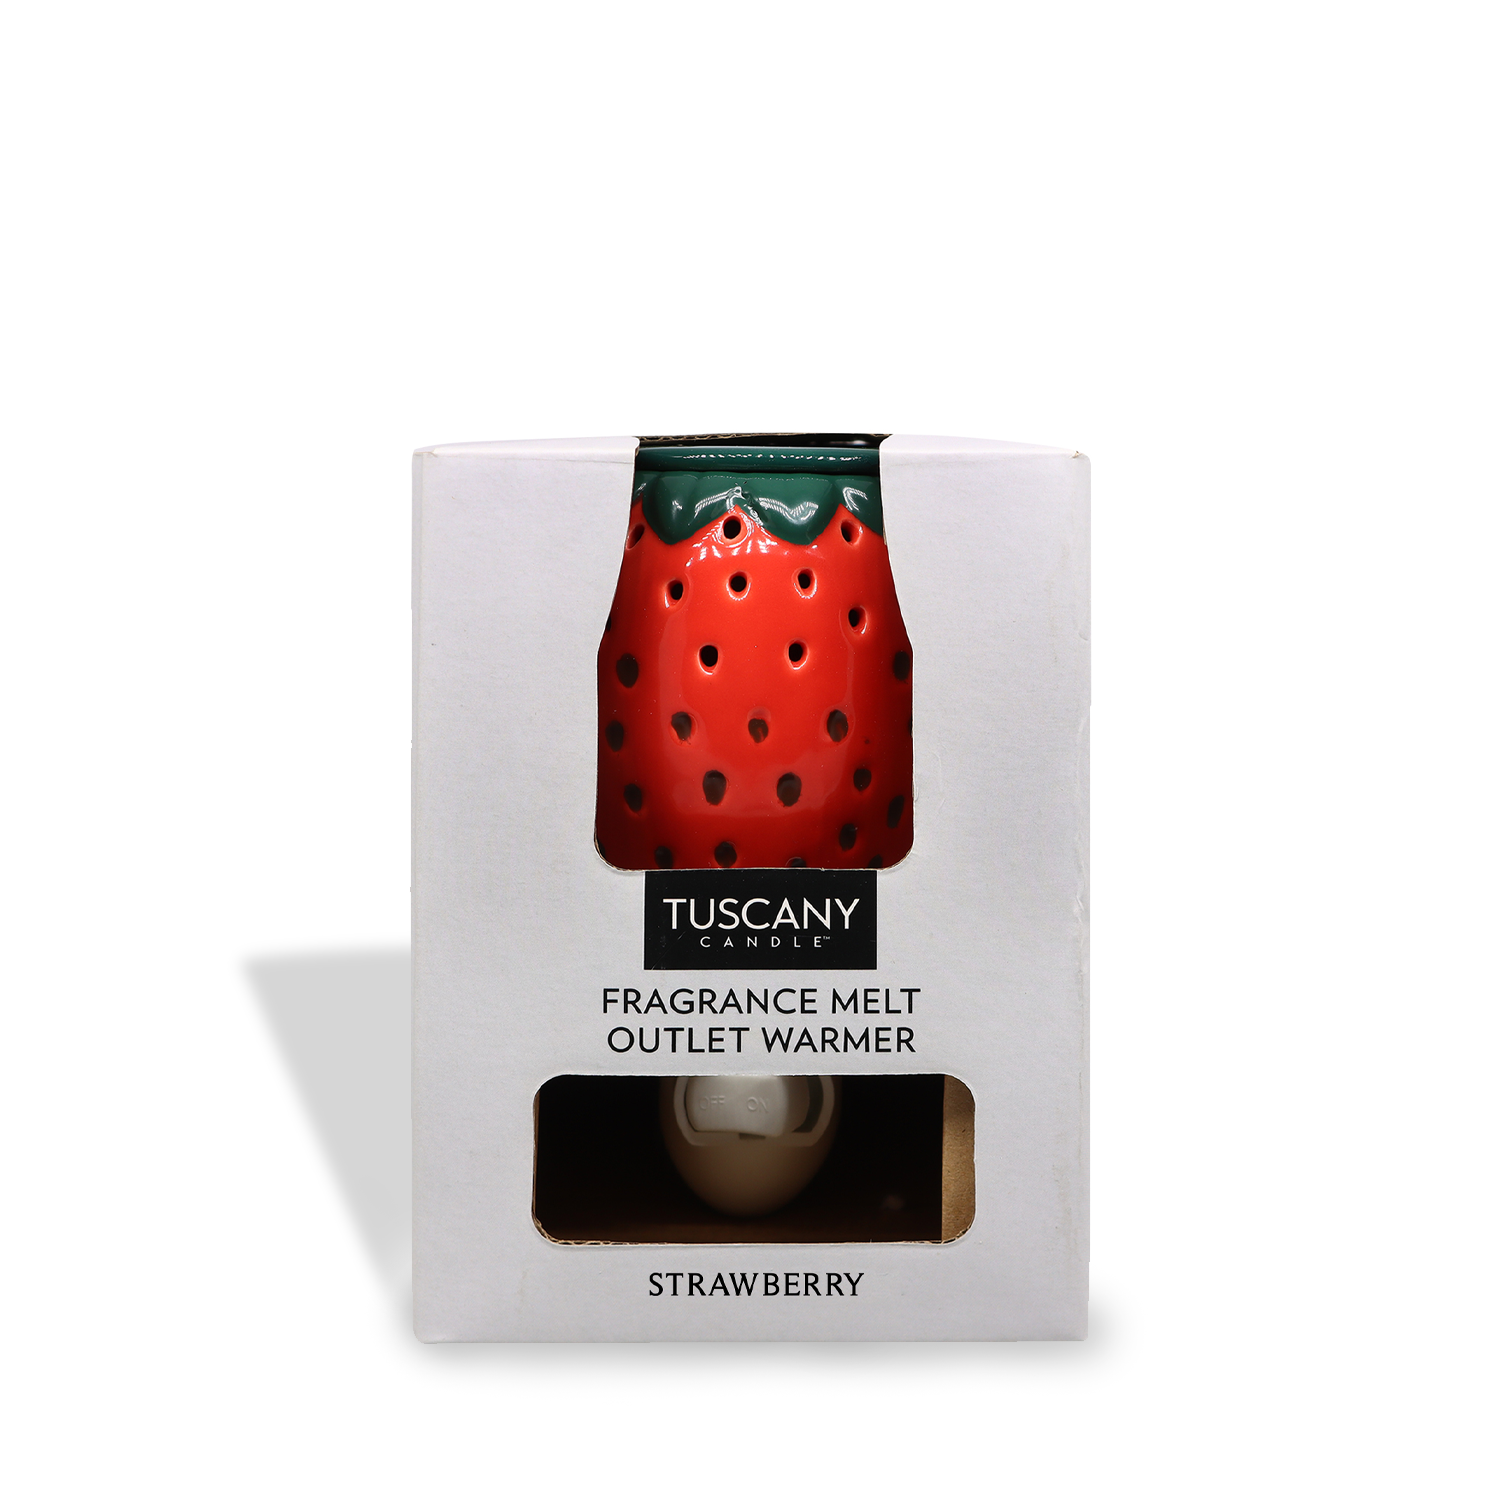 Tuscany Candle® SEASONAL Strawberry Outlet Wax Melt Warmer in packaging.